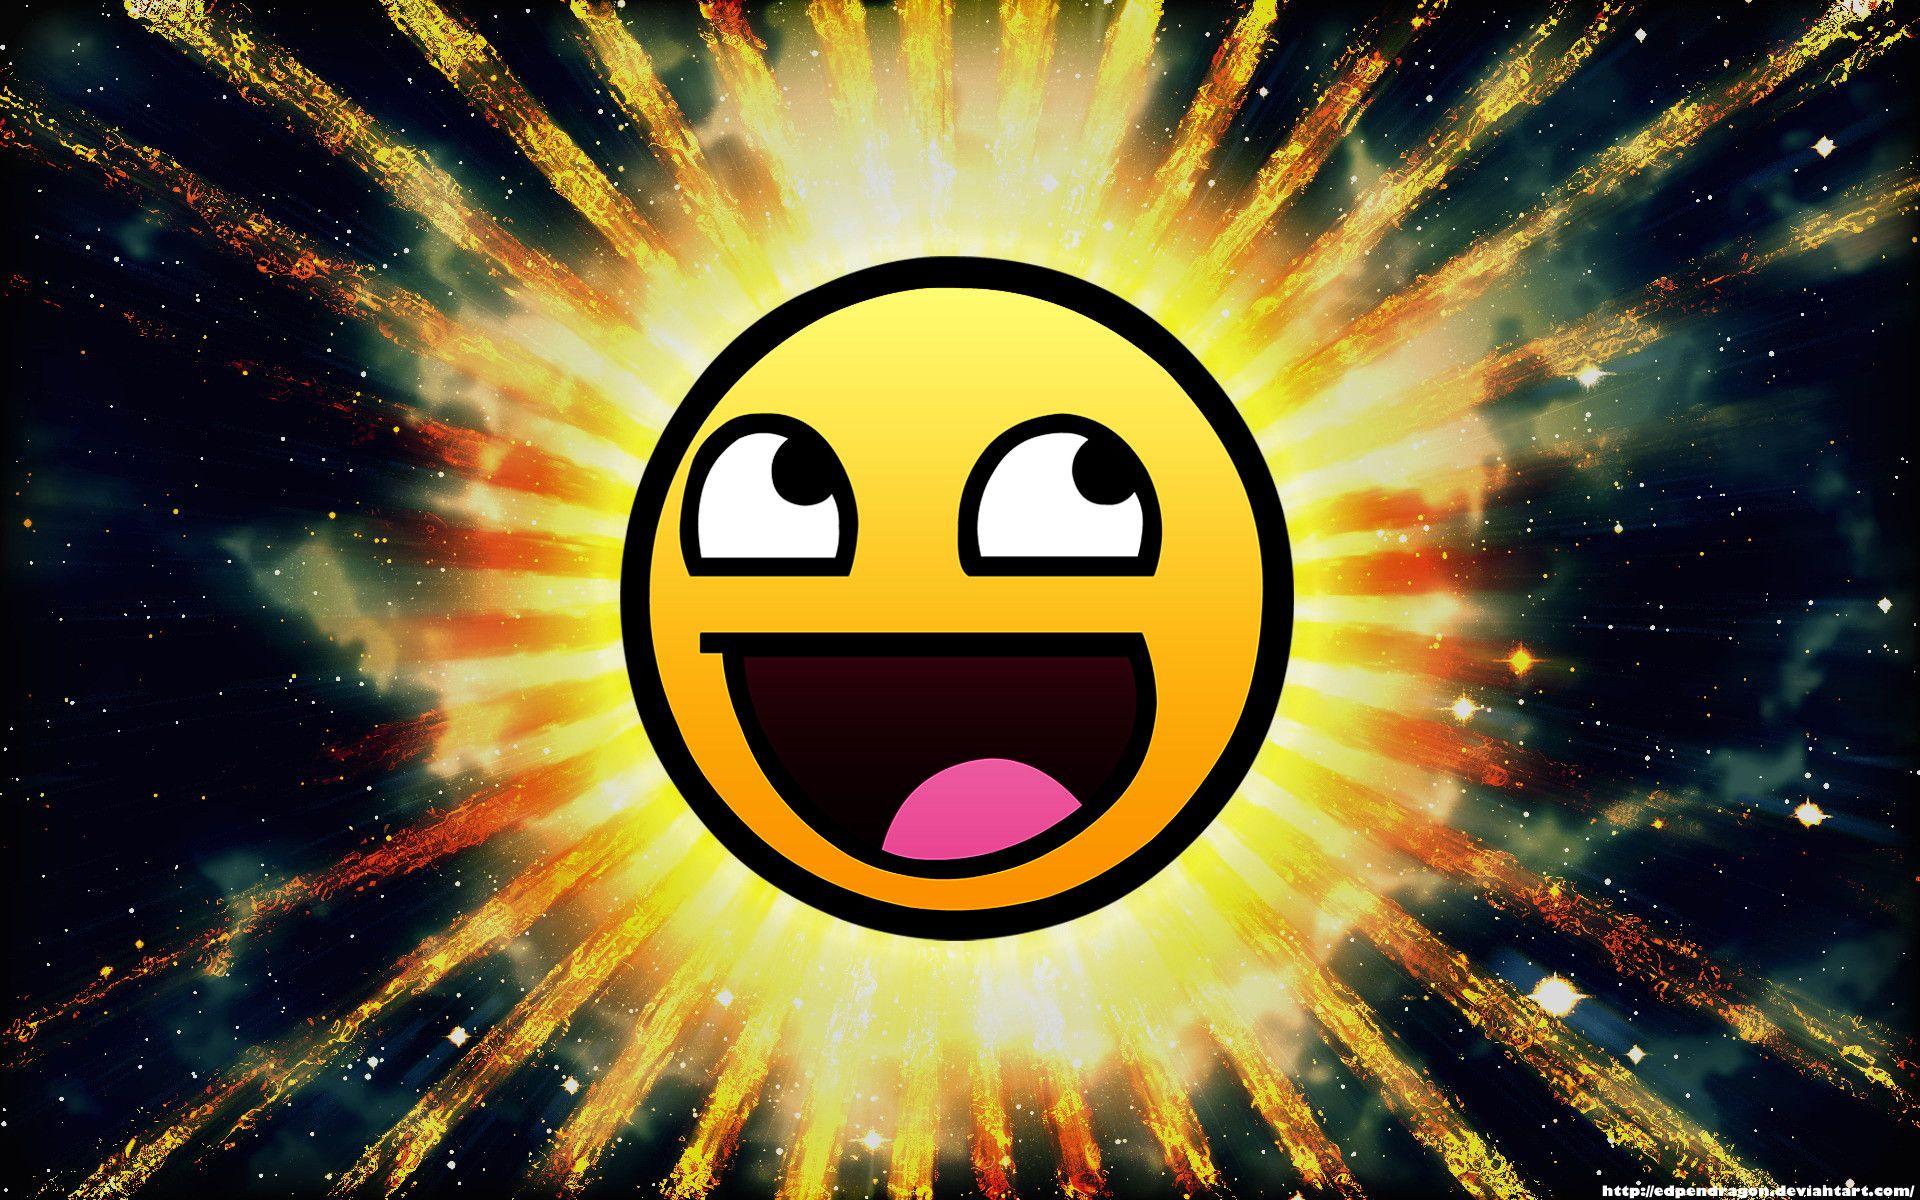 Epic Face Wallpapers Wallpaper Cave - derpy awesome face roblox awesome meme on meme